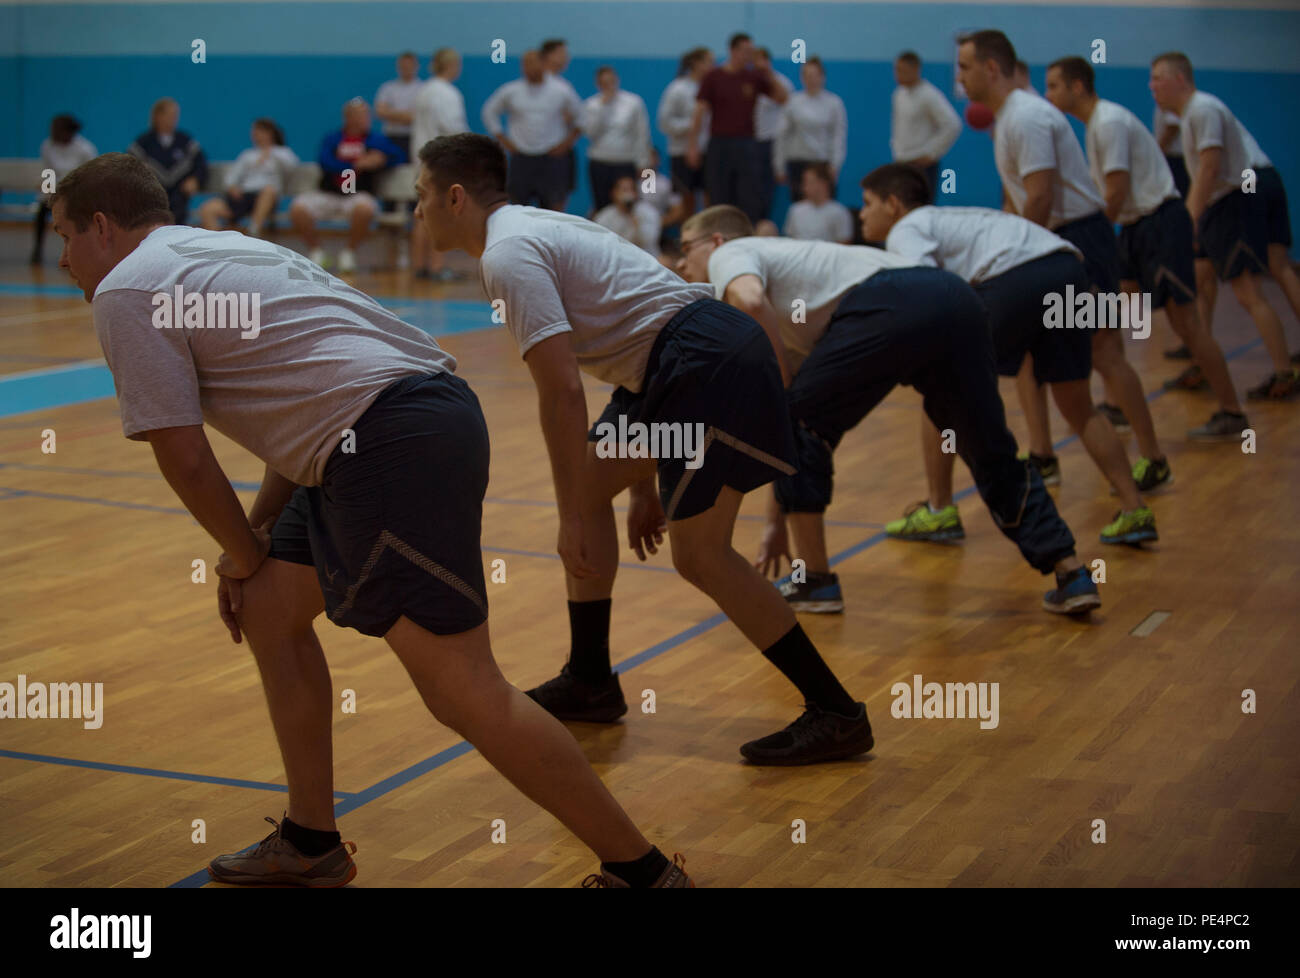 Airmen line up to prepare for a dodgeball match during the Commander’s Challenge Sept. 9, 2015, at Ramstein Air Base, Germany. The 86th Civil Engineer Squadron placed first for this tournament as well as in the overall Commander’s Challenge. (U.S. Air Force photo/Airman 1st Class Larissa Greatwood) Stock Photo